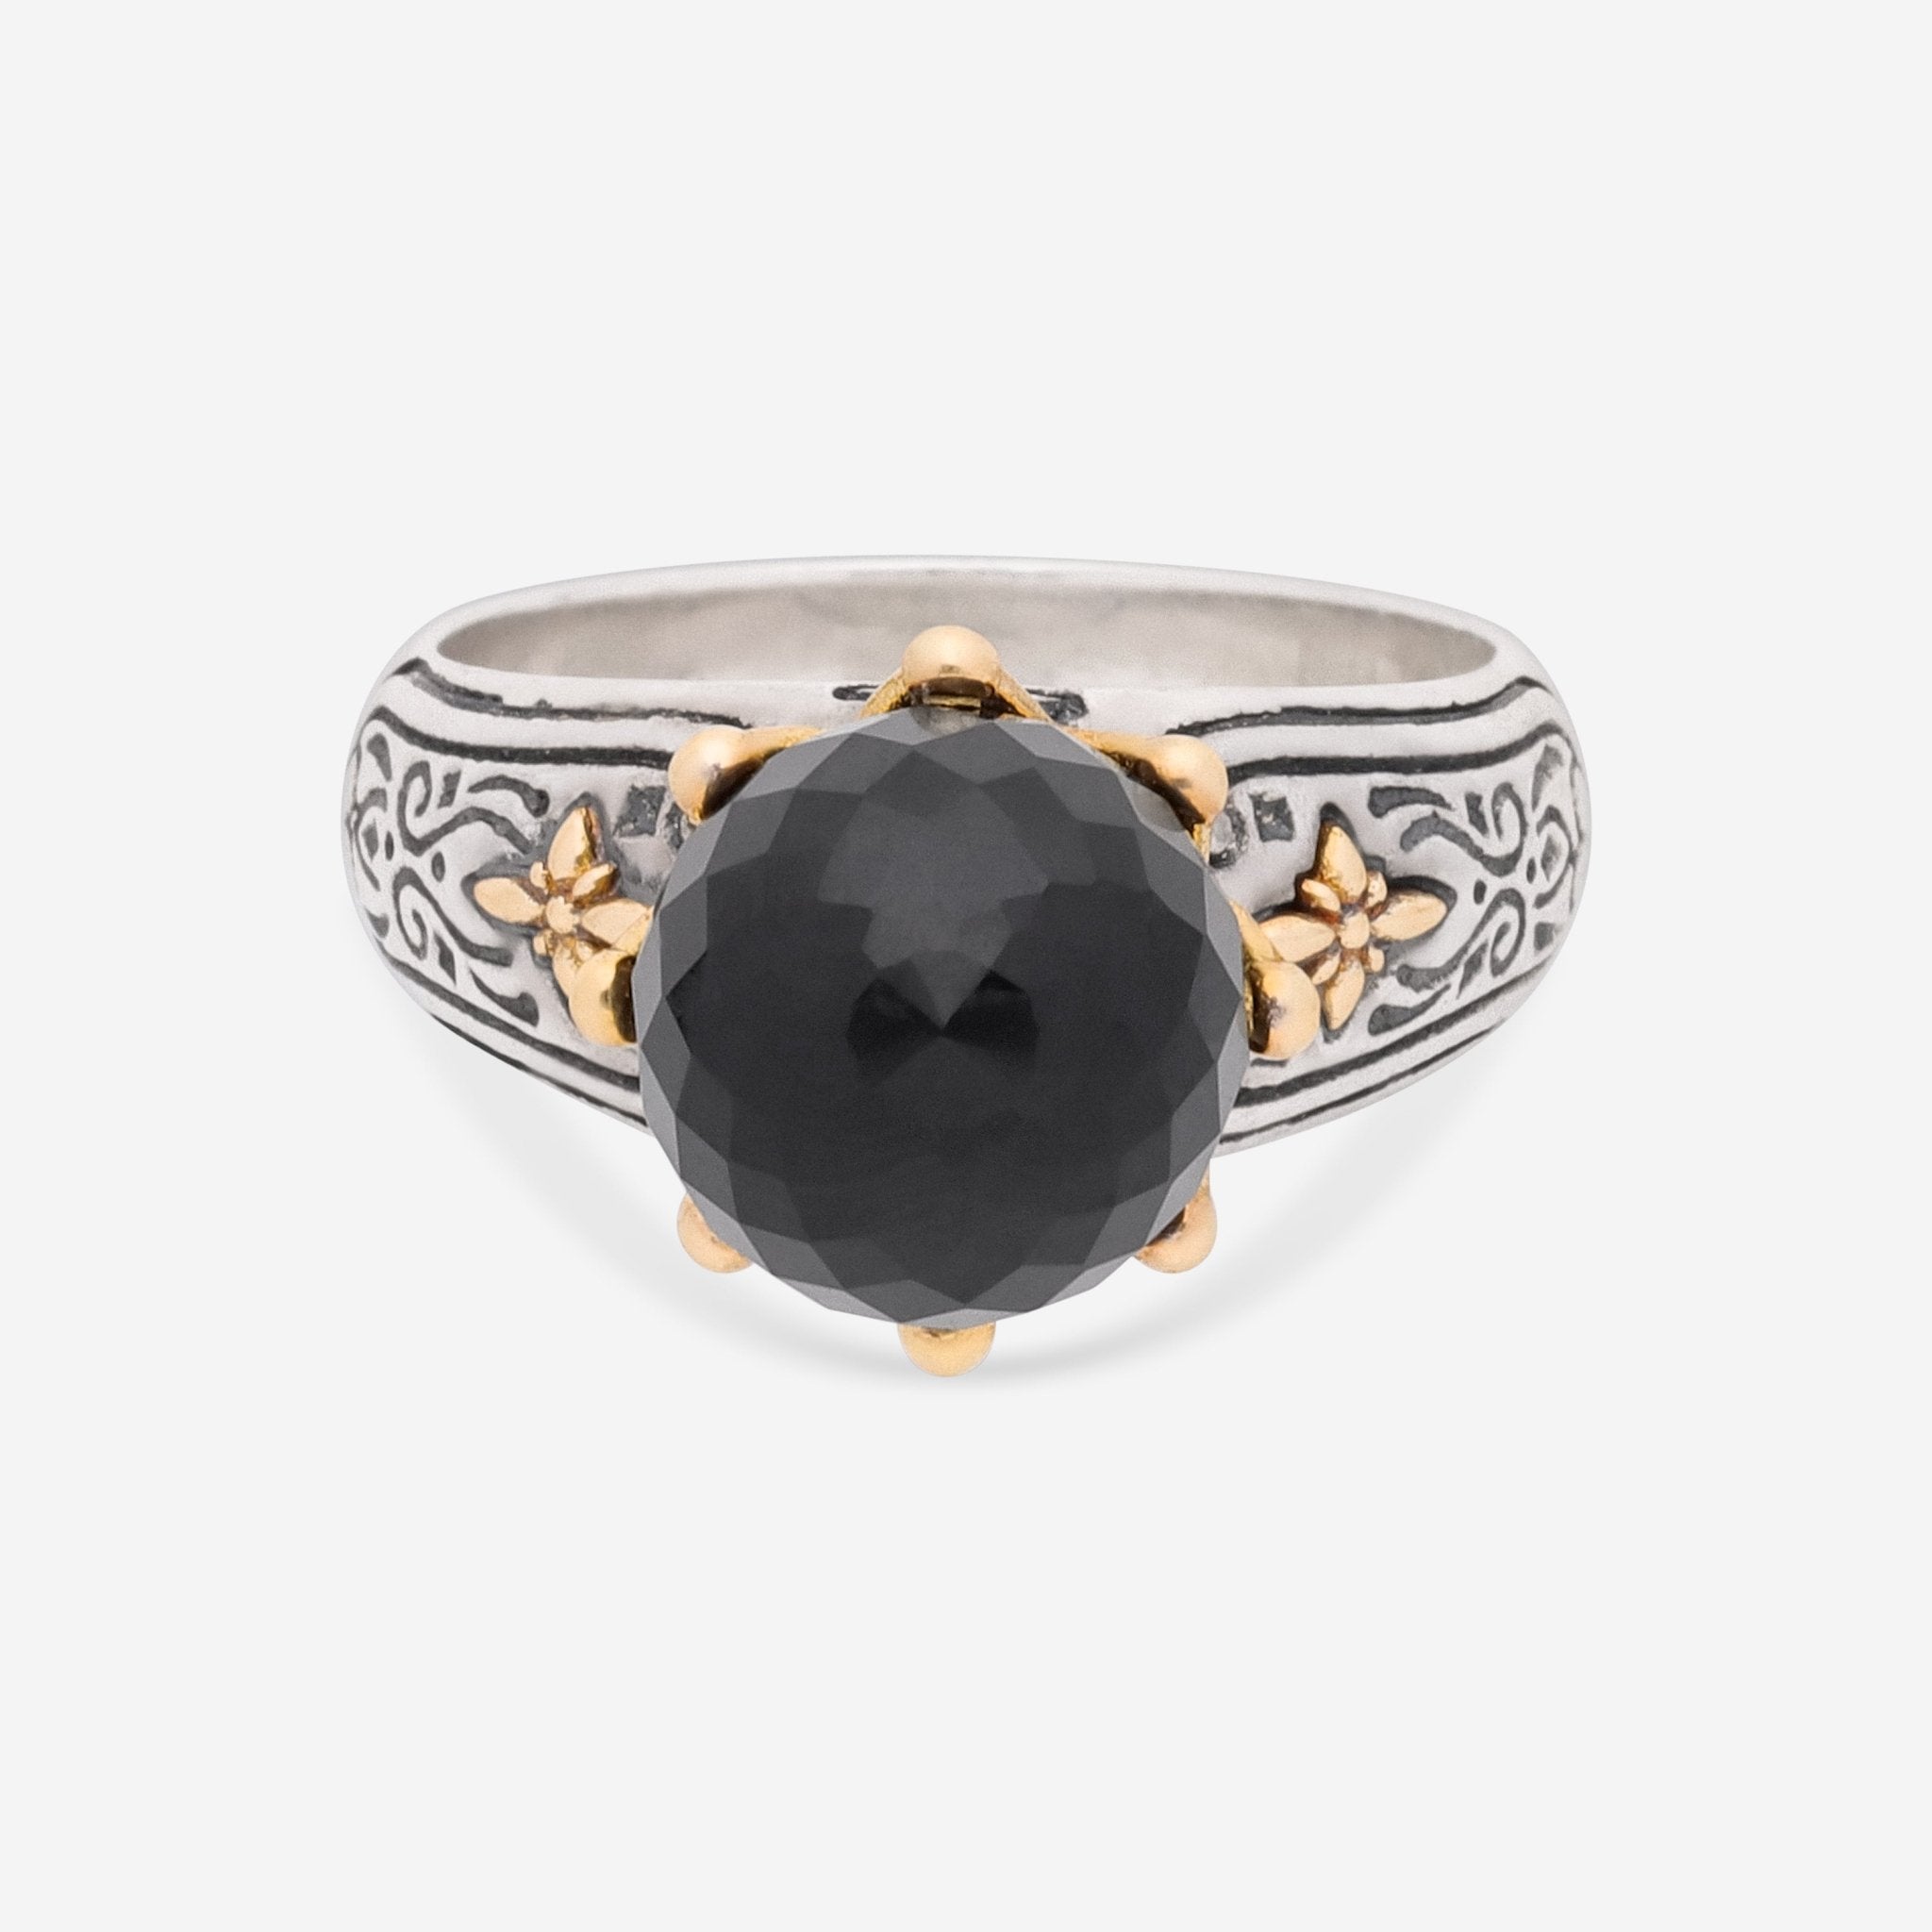 Konstantino Calypso Sterling Silver and 18K Yellow Gold, Onyx Statement Ring DKJ848 - 120 - THE SOLIST - Konstantino